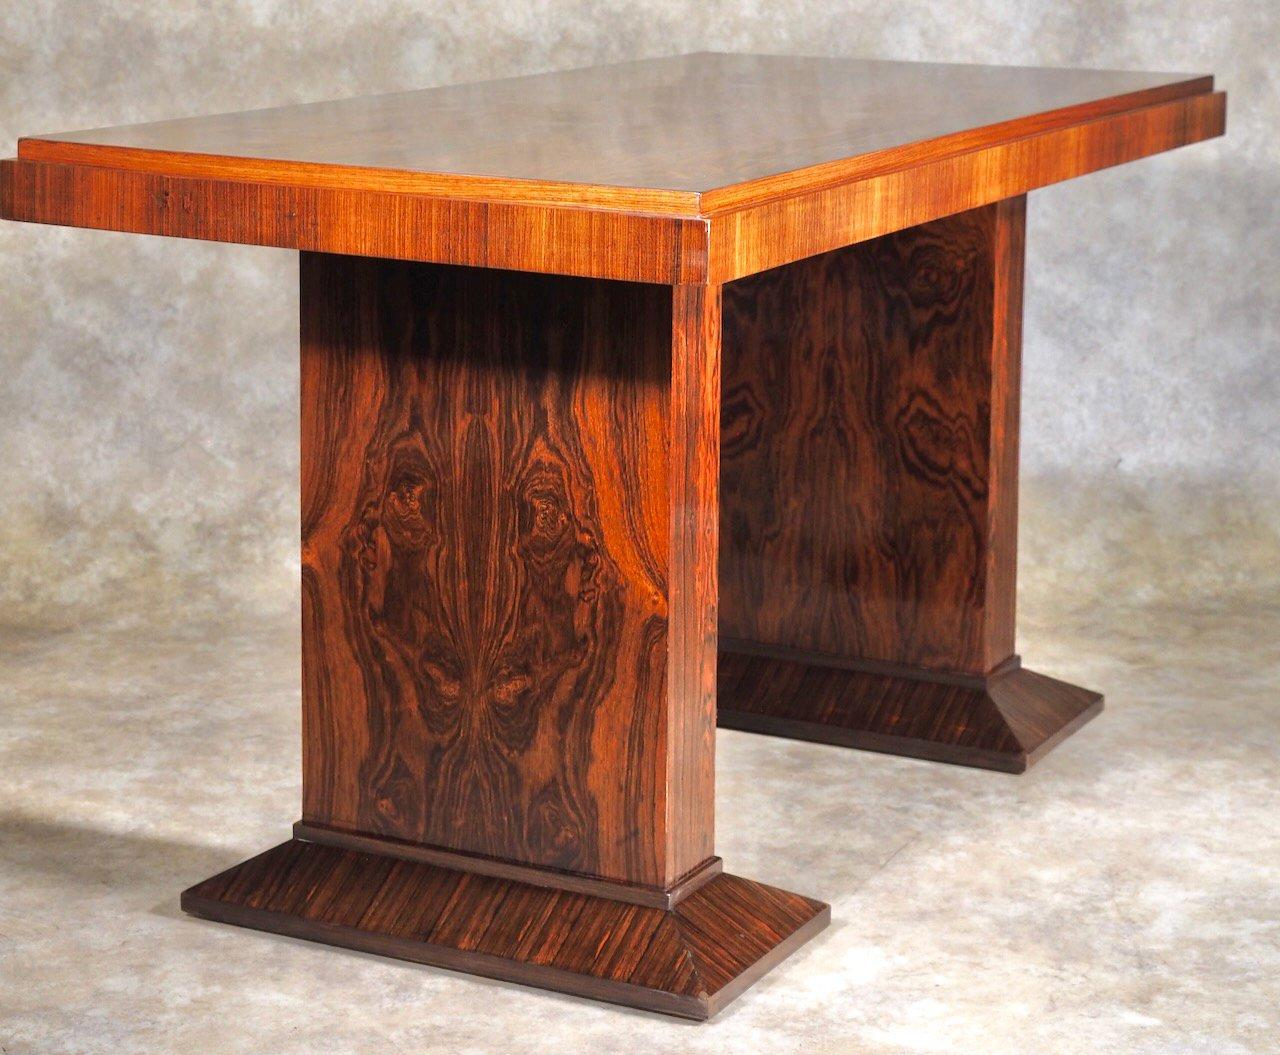 French Modernist Art Deco table / desk / console by Dominique, circa 1930, in rosewood. Measures: 55” wide x 27.5” deep x 30” high. Quarter-matched top.

Dominique


From a 1929 French exhibition catalog 